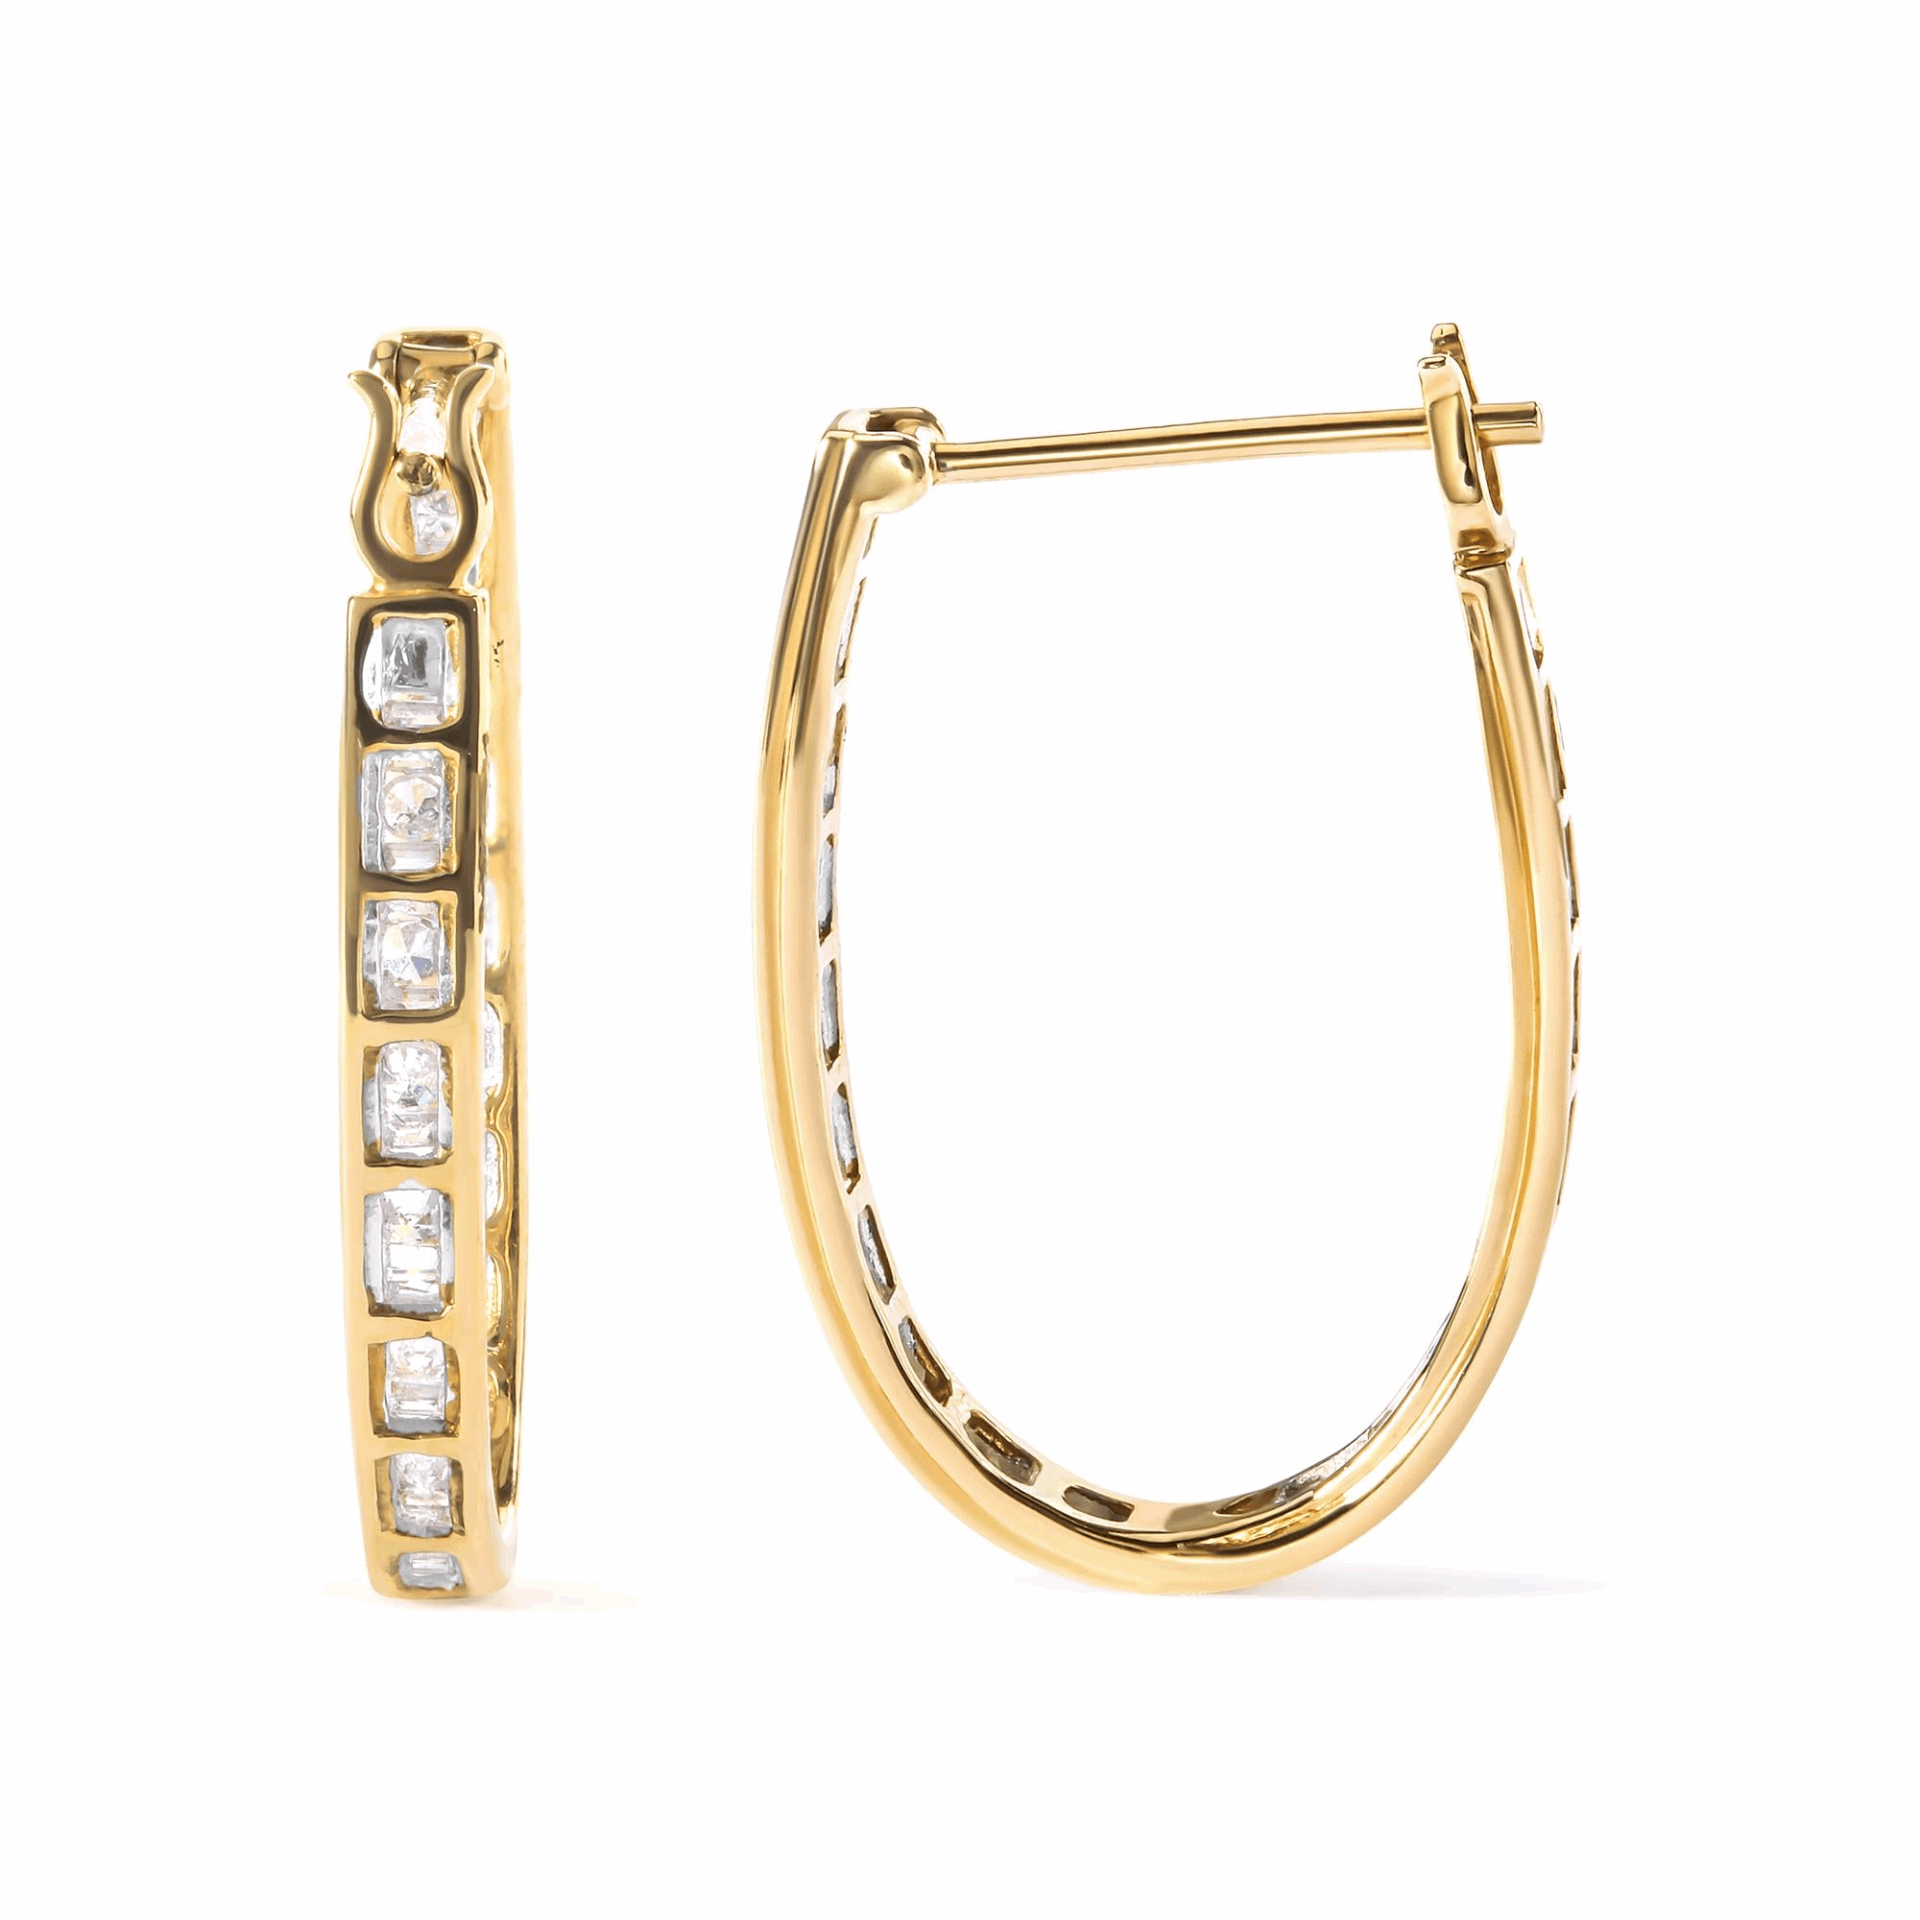 10K Yellow Gold 1.00 Cttw Round and Baguette-Cut Diamond U-Hoop Earrings (H-I Color, SI2-I1 Clarity), Goodies N Stuff